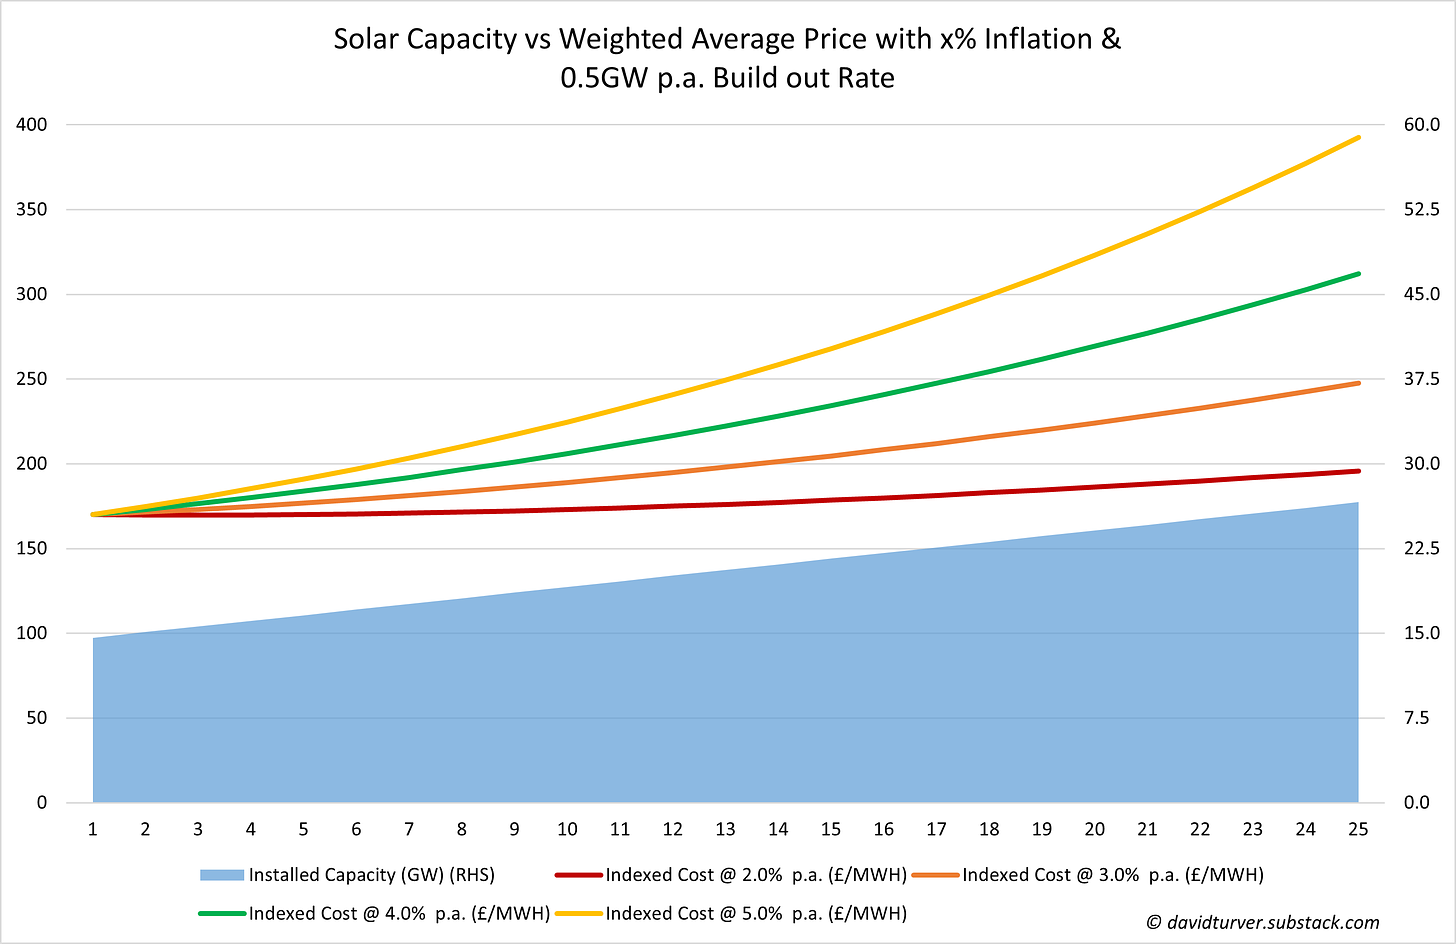 Figure 7 - Solar PV Capacity vs Weighted Average Price with x% Inflation + 0.5GW Build Out Rate